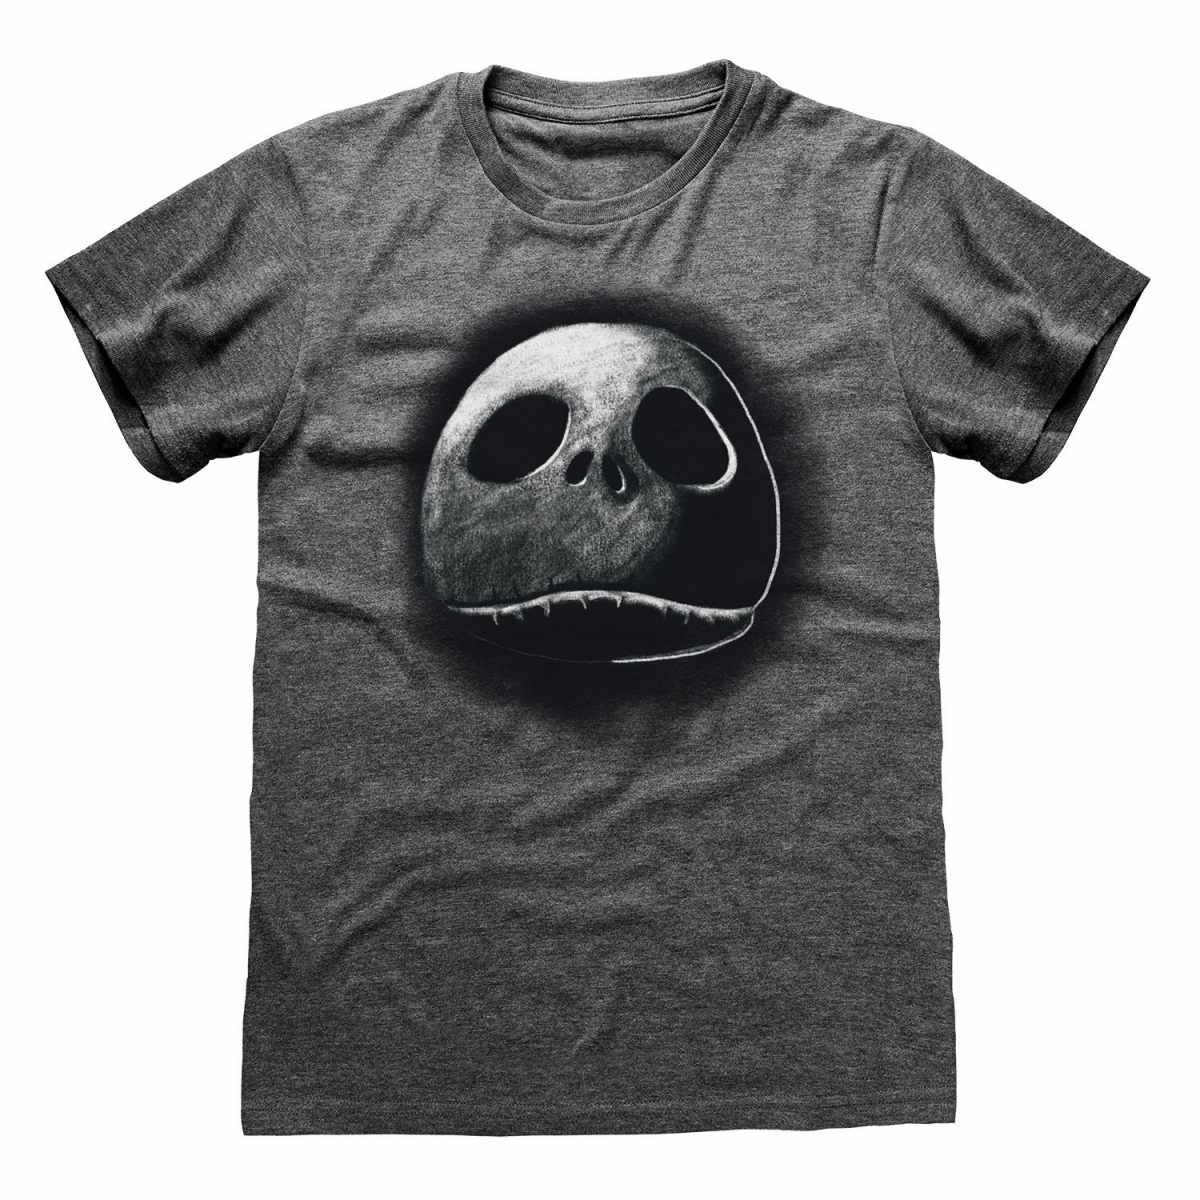 Nightmare Before Christmas Sketch Face T-Shirt